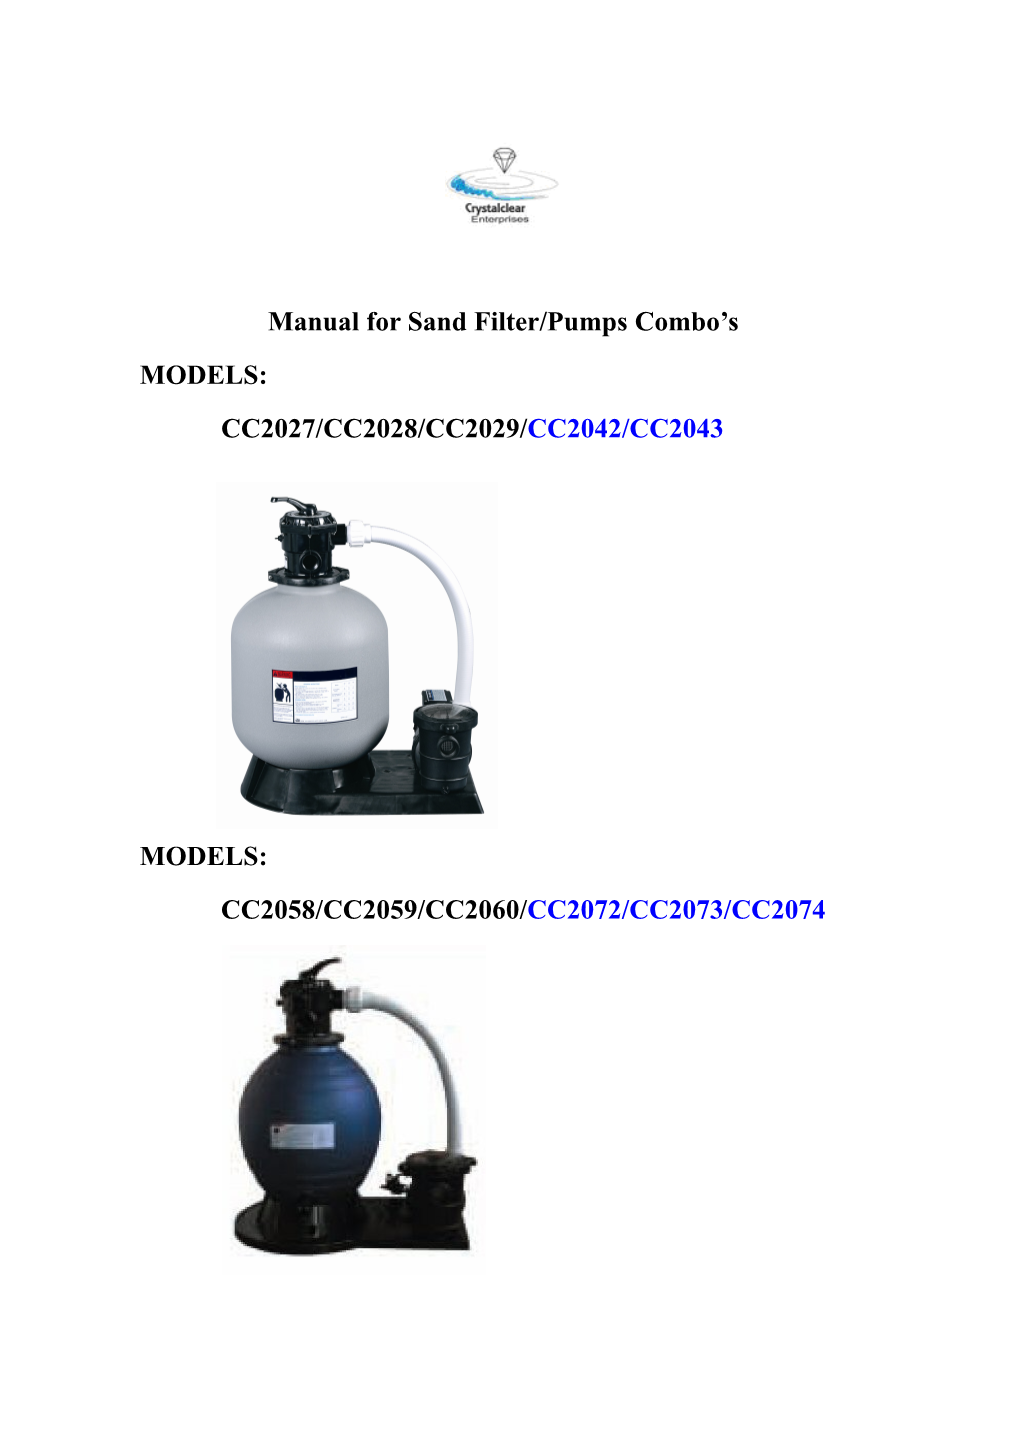 The Manual of Sand Filter with Pumps